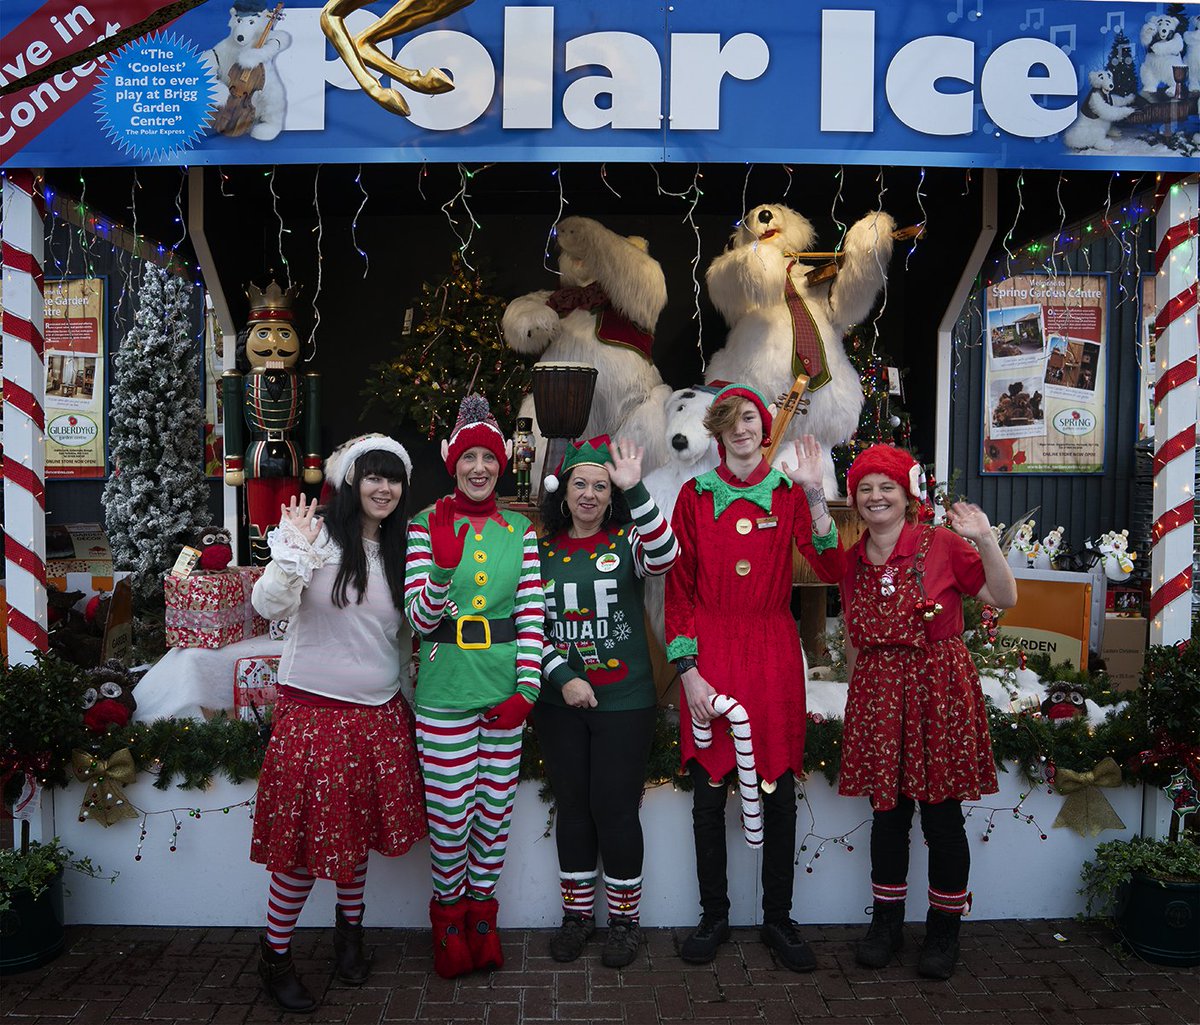 British Garden Centres On Twitter Elfday Some Of The Team At Brigg Garden Centre Who Took Part In Elf Day Raising Money For The Alzheimers Society Alzheimers Https T Co Y9vaihqkmc